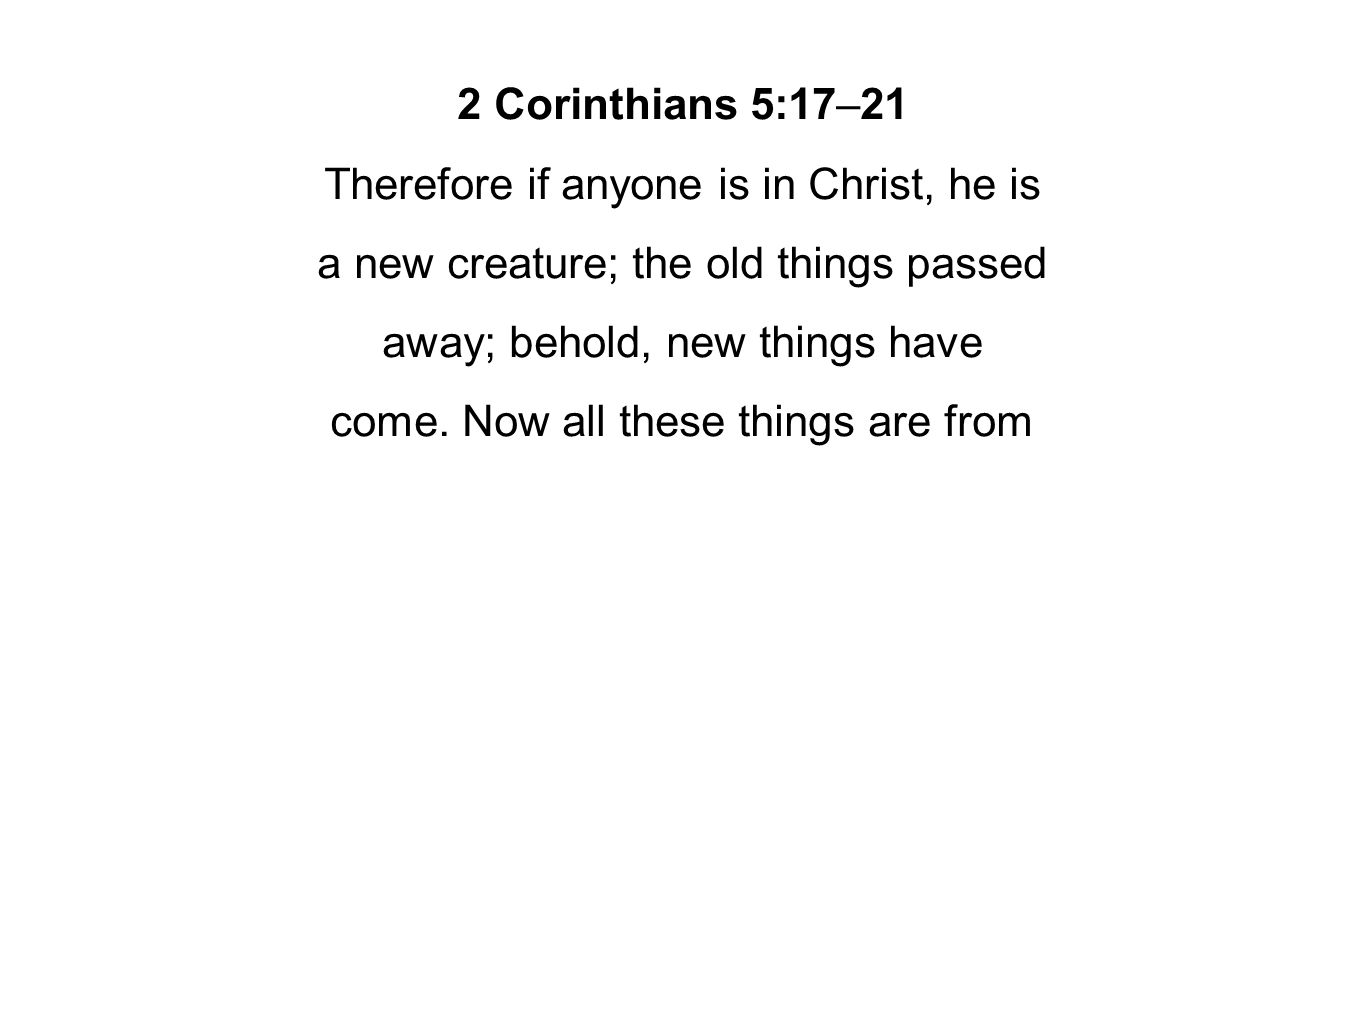 2 Corinthians 5:17–21 Therefore if anyone is in Christ, he is a new creature; the old things passed away; behold, new things have come.